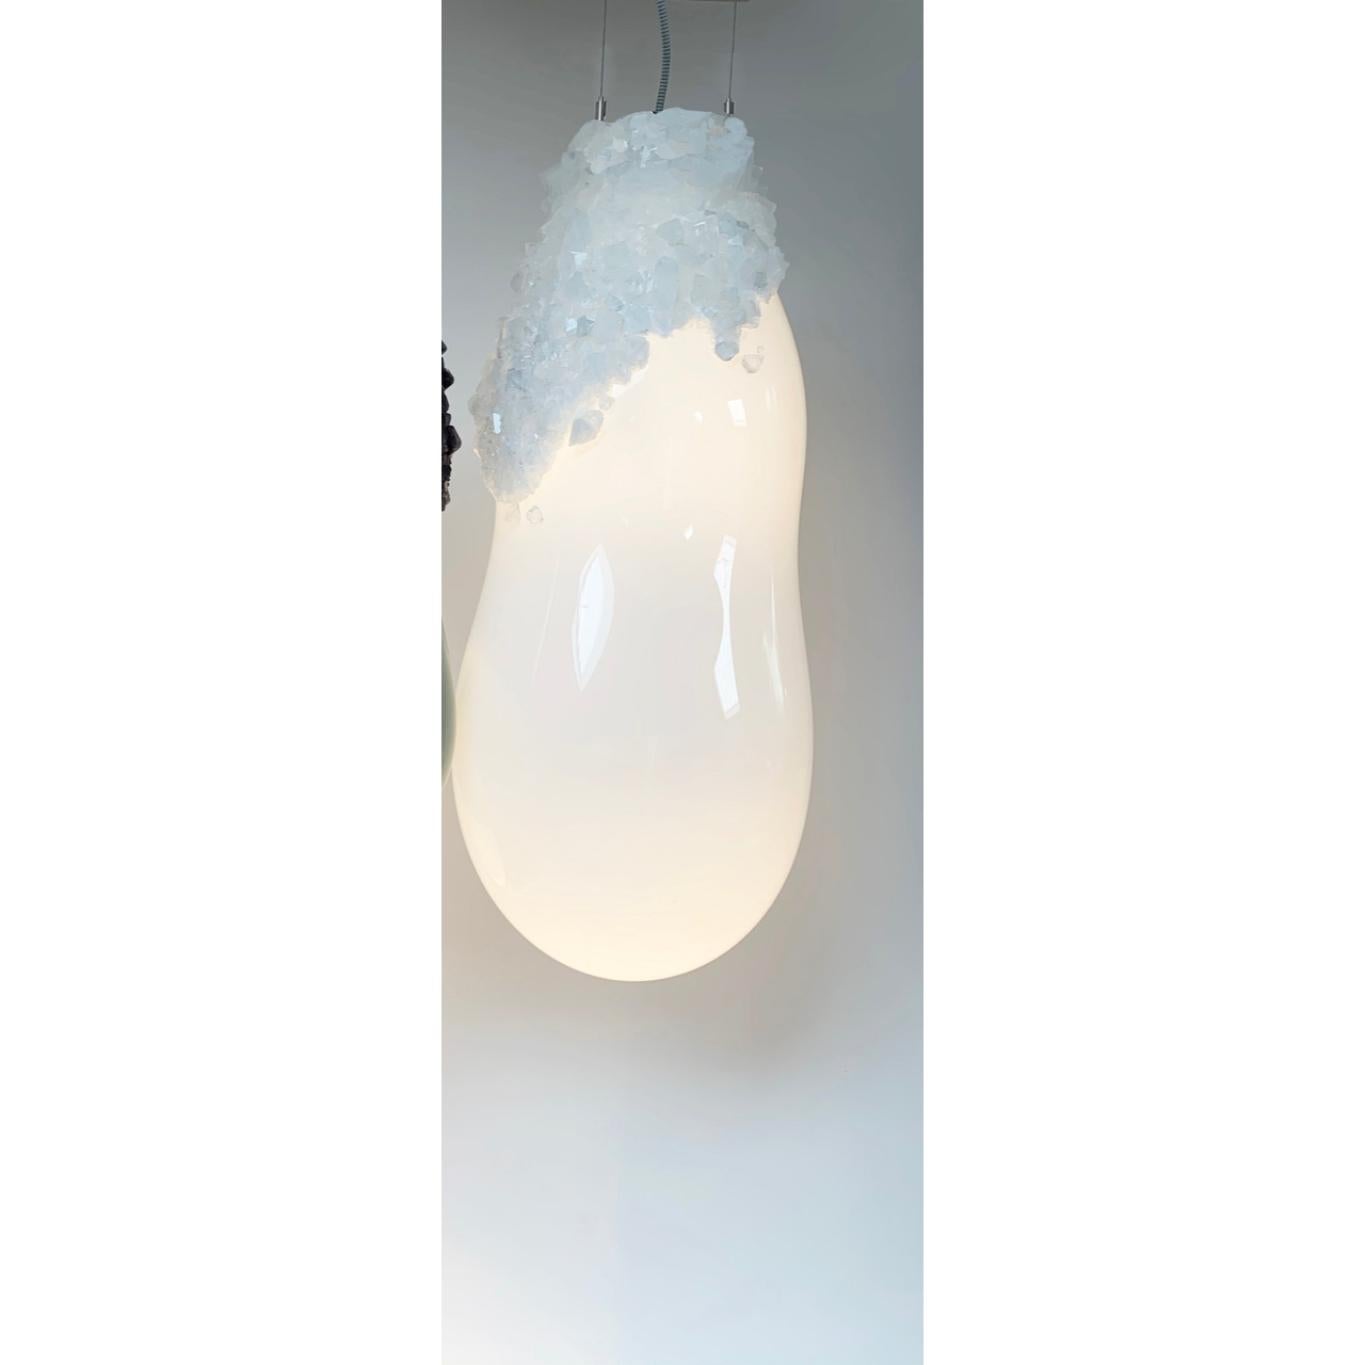 Large overgrown bubbles by Mark Sturkenboom and Alex de Witte
Dimensions: D 30 x H 76 cm 
Material: Mouthblown glass, natural grown crystal, dimmable led, colour white or grey black
Ceiling ornaments can be produced in crystal to extend the